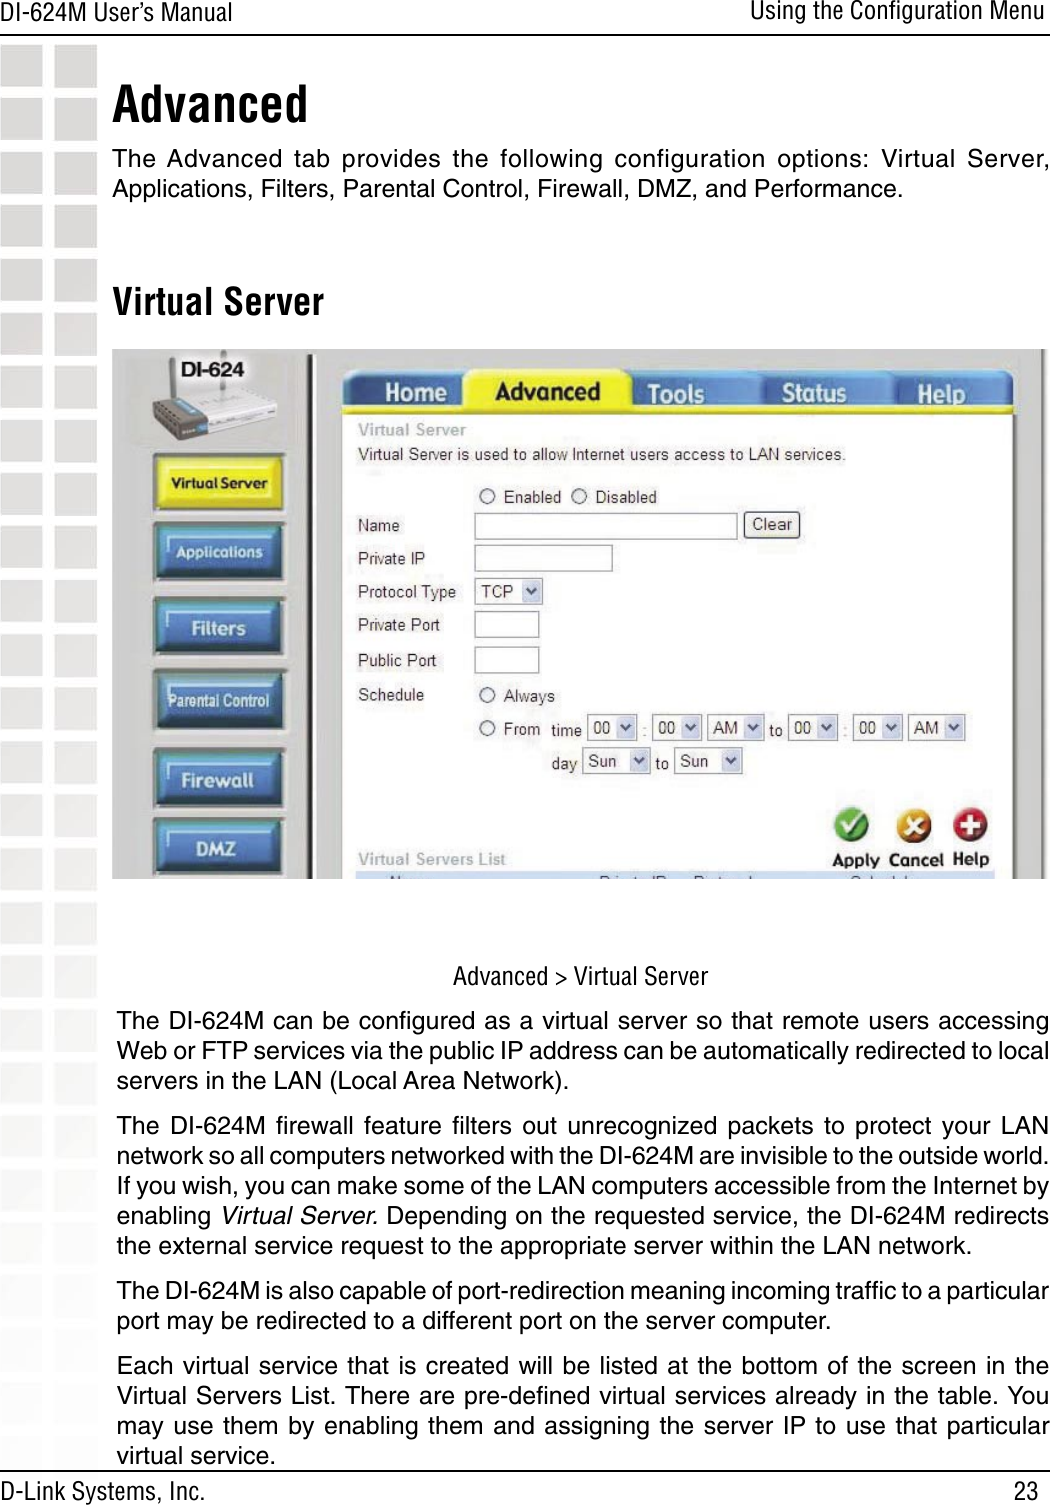 23DI-624M User’s Manual D-Link Systems, Inc.Using the Conﬁguration MenuVirtual ServerThe DI-624M can be conﬁgured as a virtual server so that remote users accessing Web or FTP services via the public IP address can be automatically redirected to local servers in the LAN (Local Area Network). The  DI-624M  ﬁrewall  feature  ﬁlters  out  unrecognized  packets to  protect  your  LAN network so all computers networked with the DI-624M are invisible to the outside world. If you wish, you can make some of the LAN computers accessible from the Internet by enabling Virtual Server. Depending on the requested service, the DI-624M redirects the external service request to the appropriate server within the LAN network. The DI-624M is also capable of port-redirection meaning incoming trafﬁc to a particular port may be redirected to a different port on the server computer.Each virtual service that is created will be listed at the bottom of the screen in the Virtual Servers List. There are pre-deﬁned virtual services already in the table. You may use them by enabling them and assigning the server IP to use that particular virtual service.AdvancedThe Advanced  tab  provides  the  following  configuration  options:  Virtual  Server, Applications, Filters, Parental Control, Firewall, DMZ, and Performance.Advanced &gt; Virtual Server